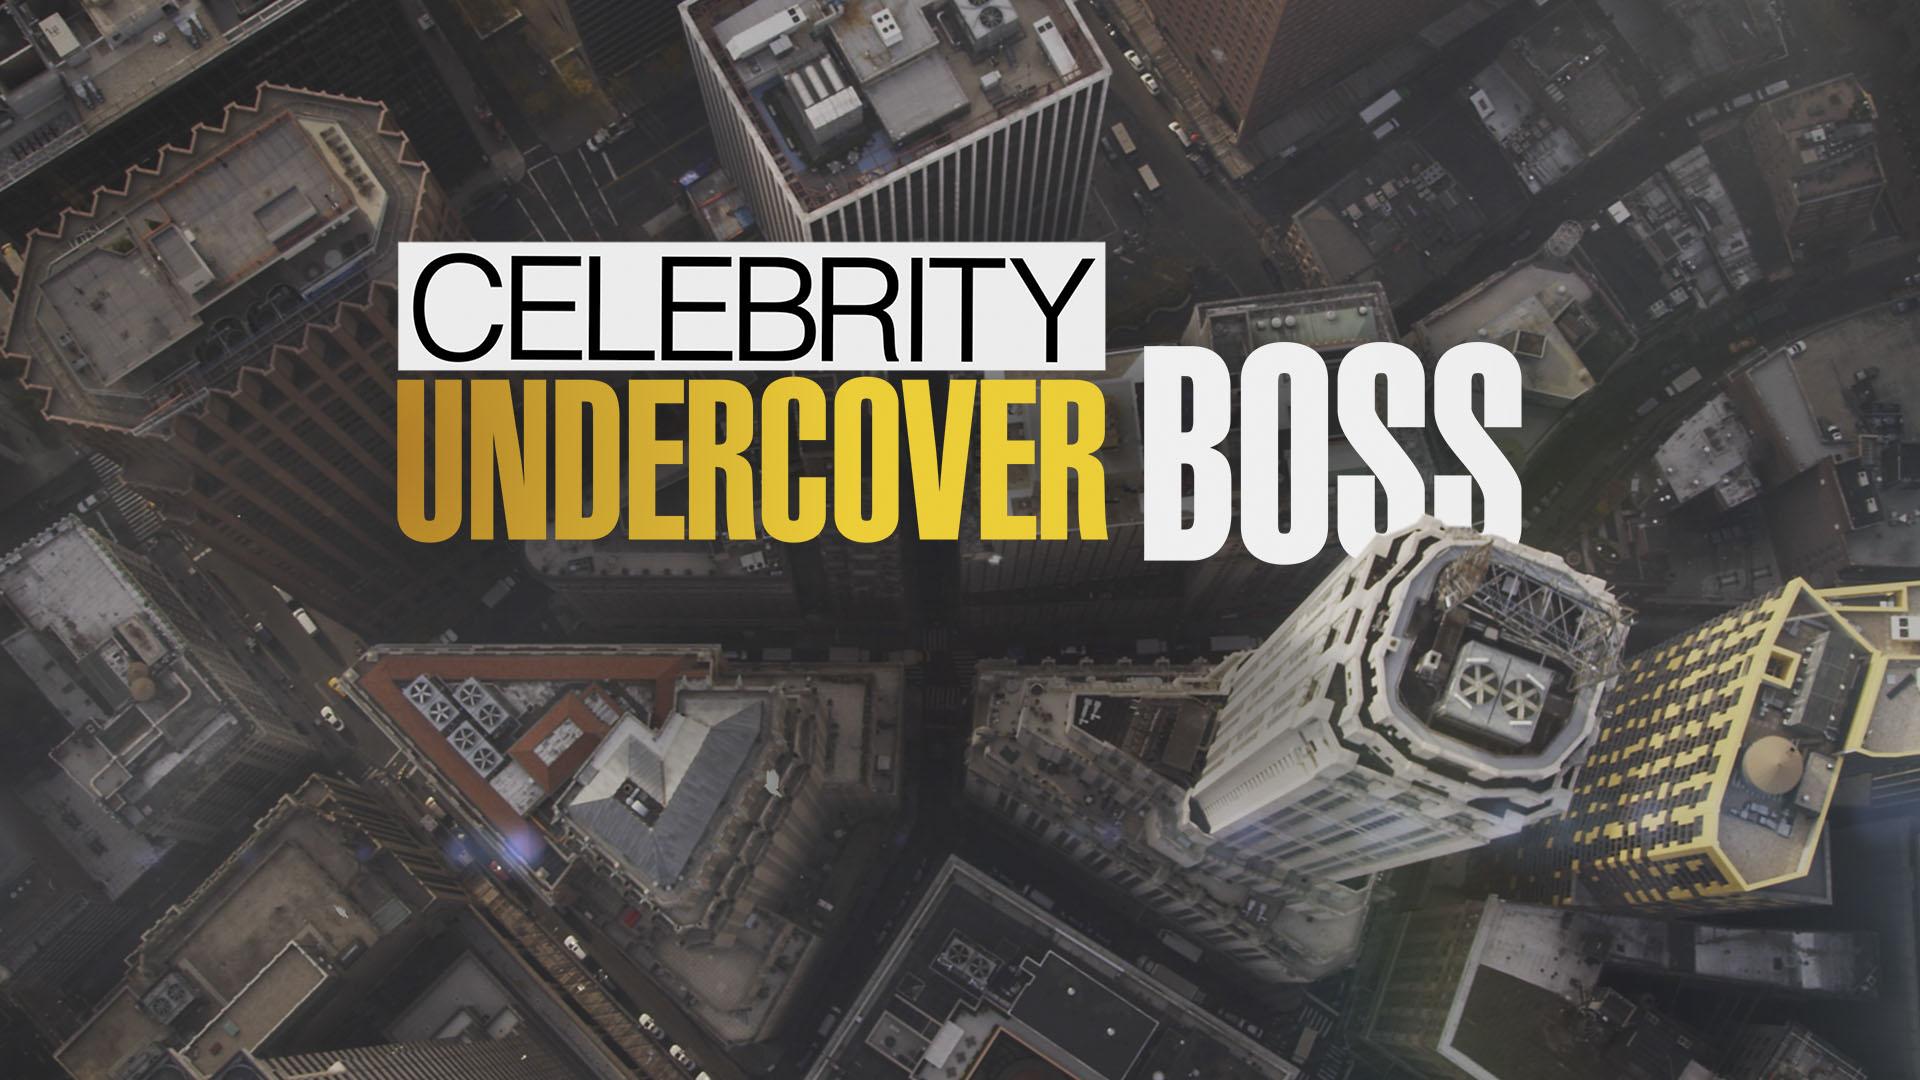 "Undercover Boss" typically features executives going &am...